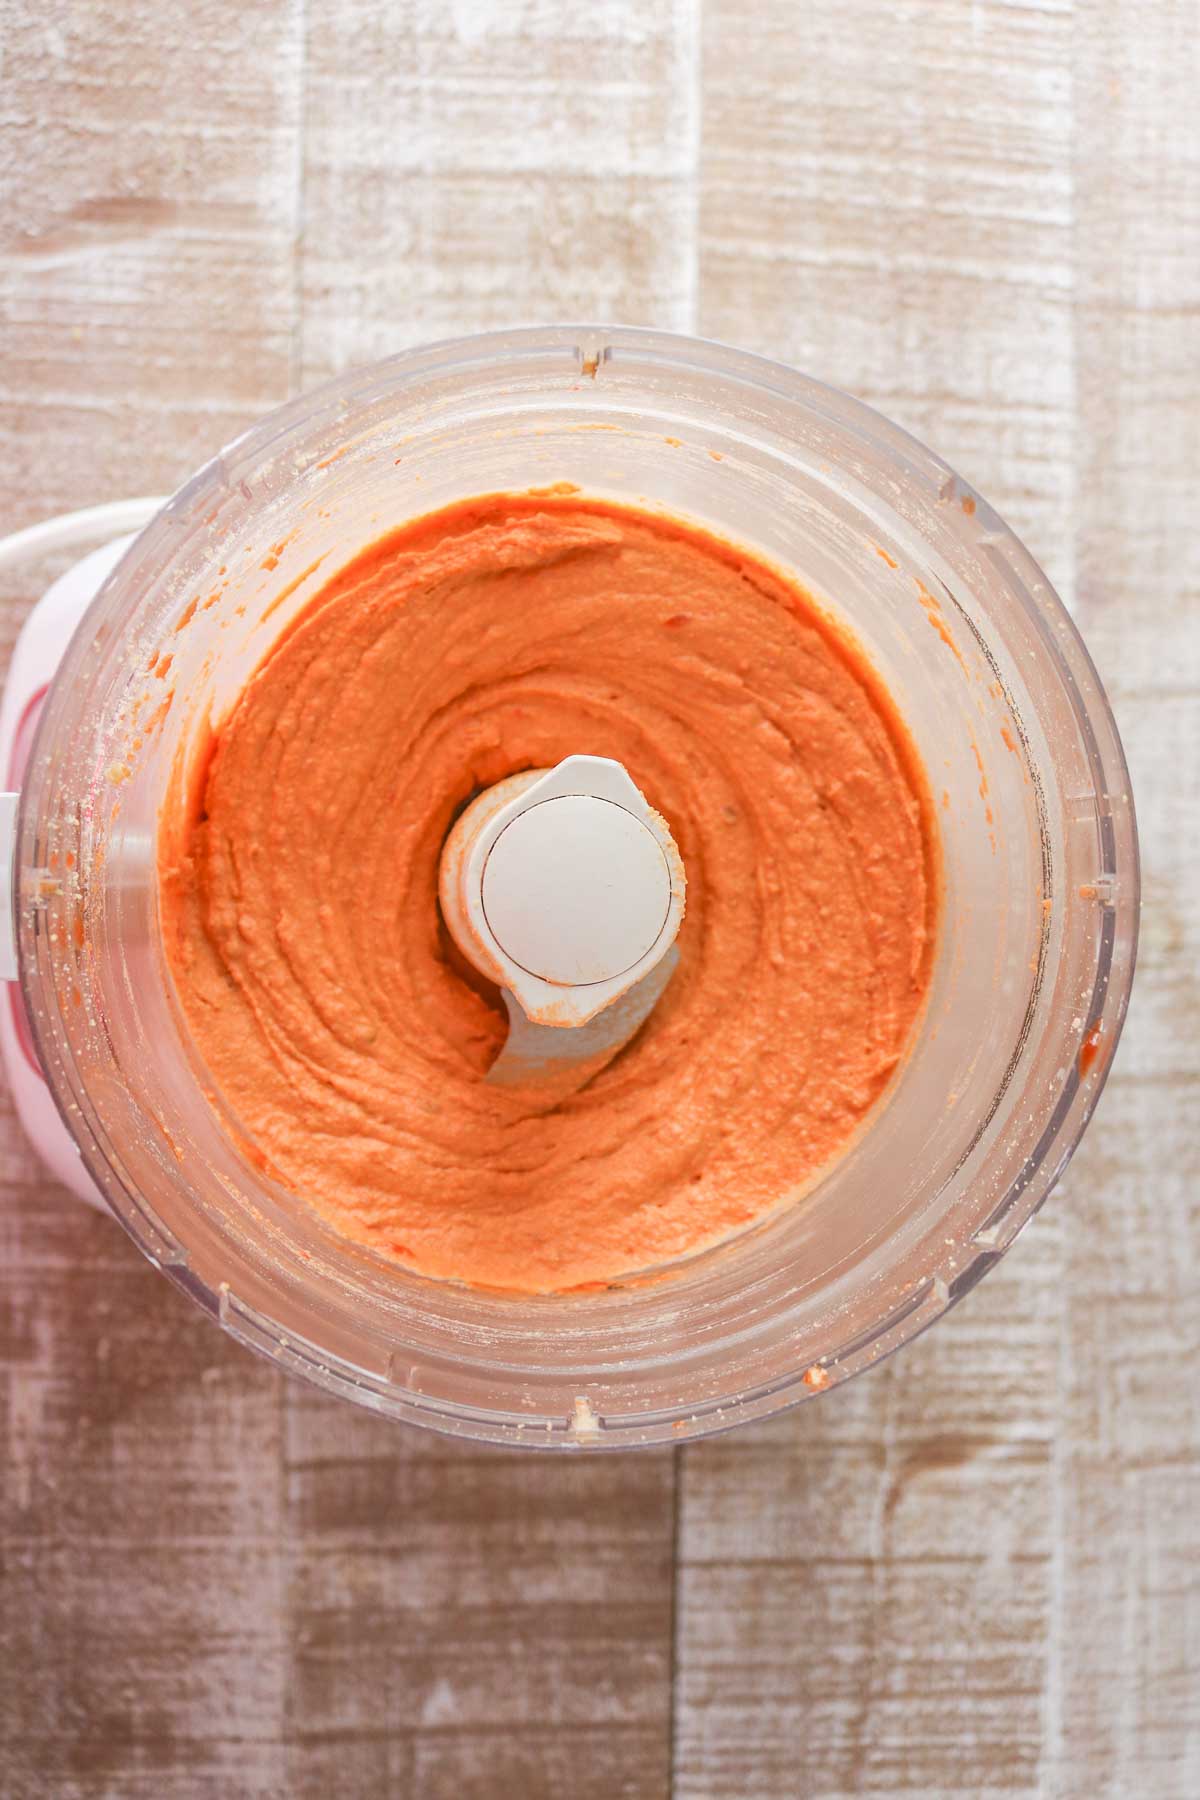 Flavoured hummus in a food processor.